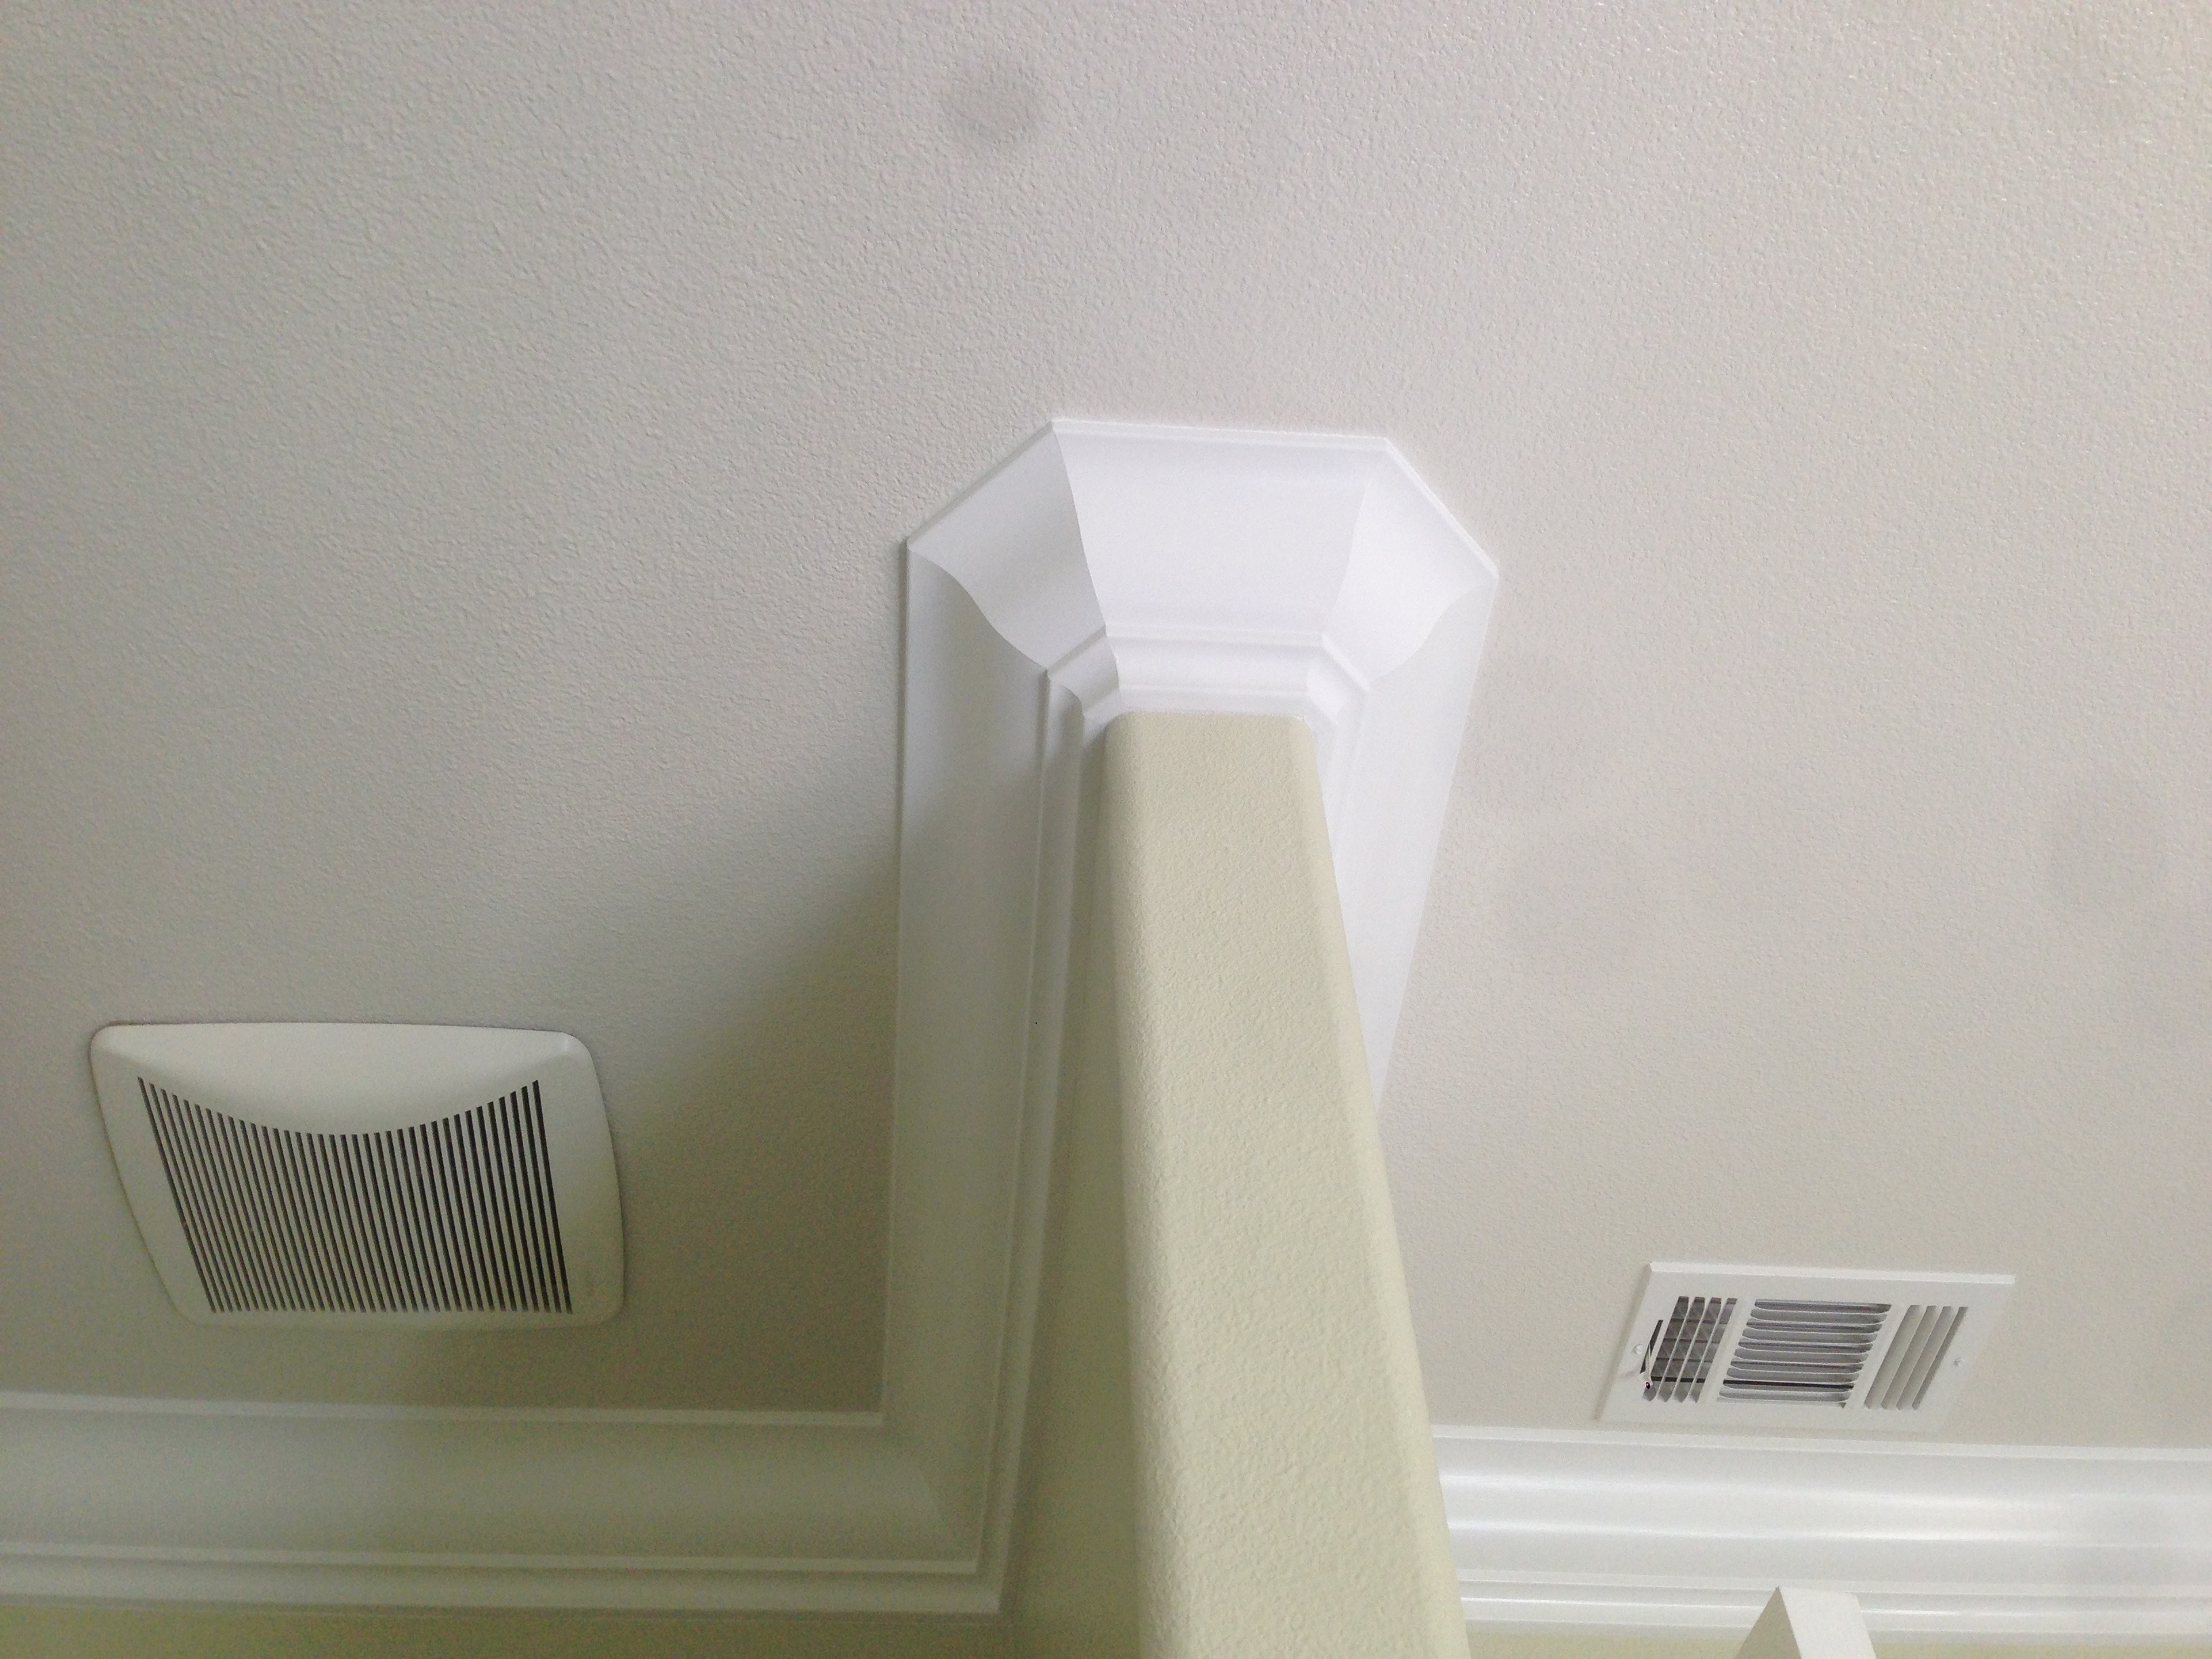 Crown Molding Installation Temecula Ca, How To Install Crown Moulding On Rounded Corners